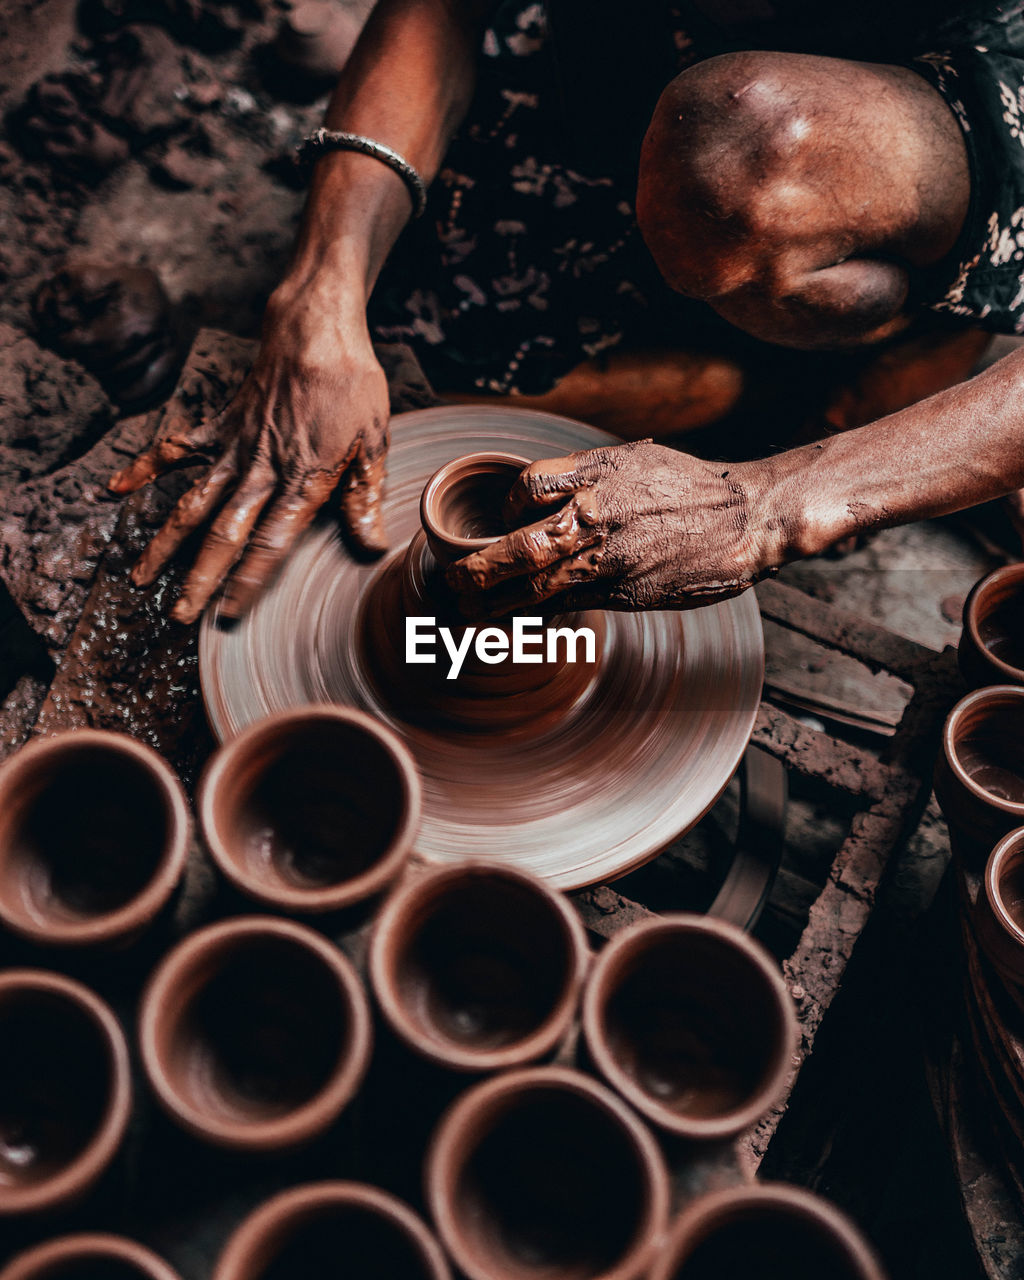 Midsection of person working on pottery wheel